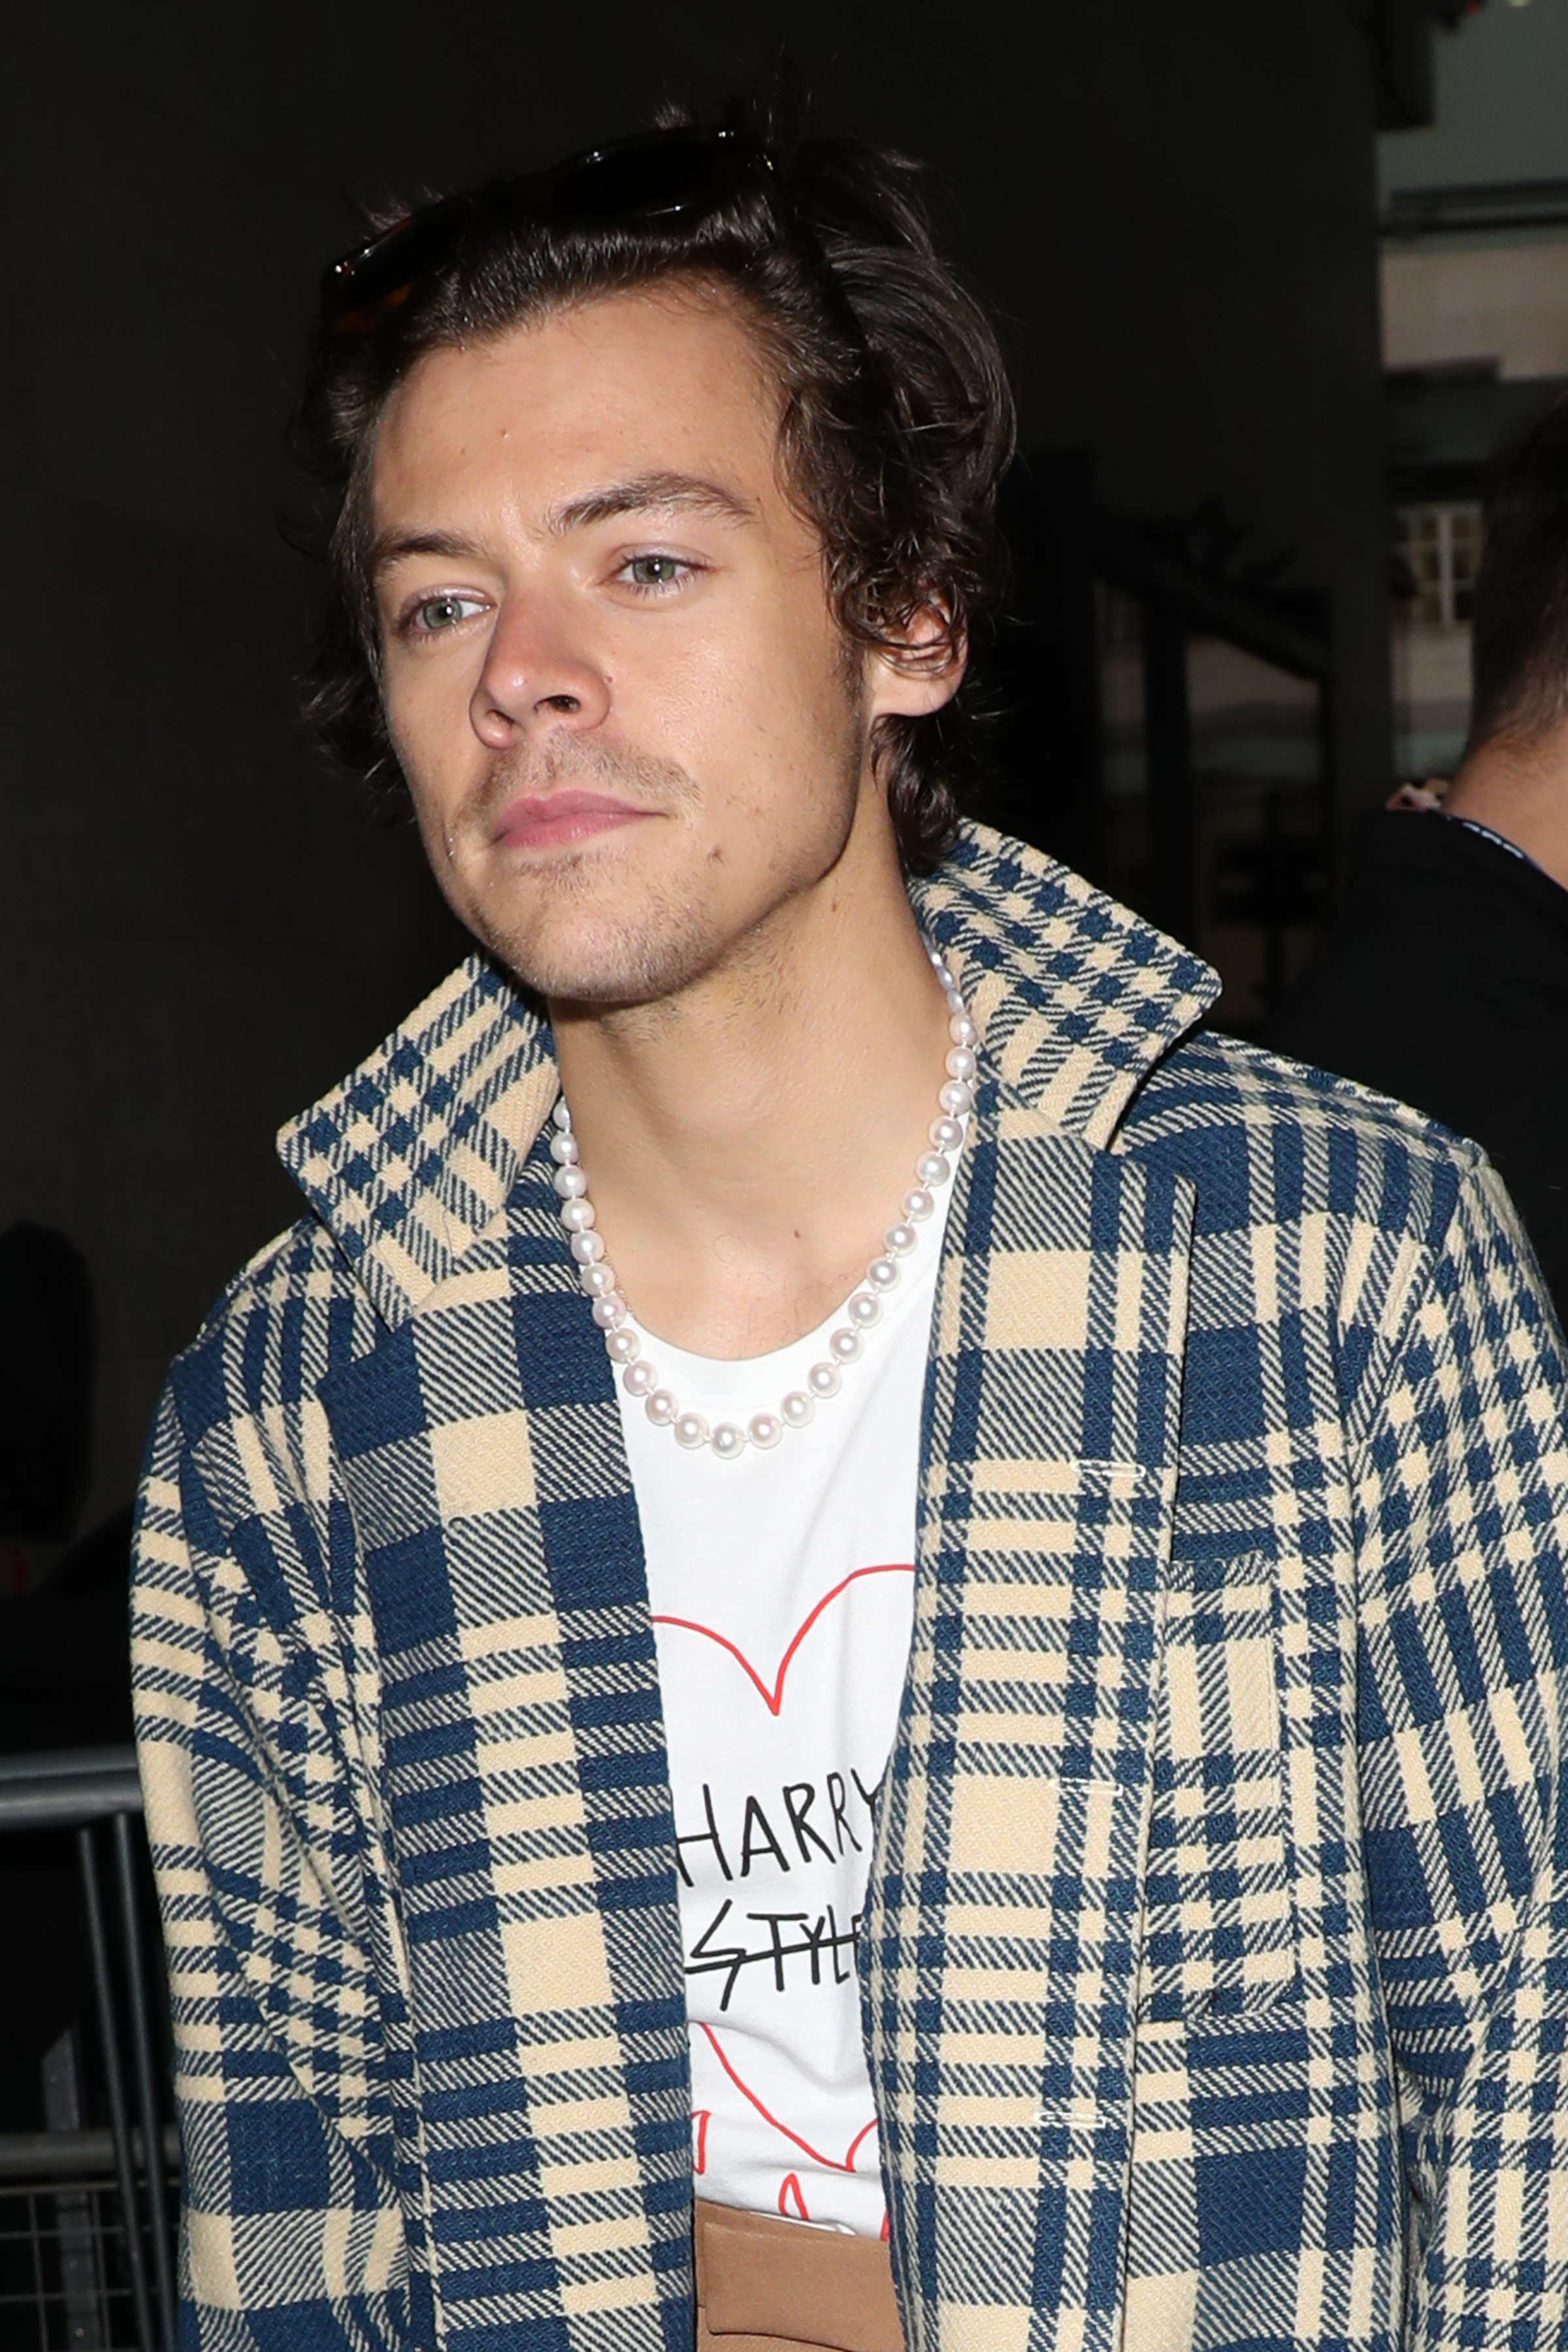 Harry Styles seen leaving BBC Radio One after performing in the Live Lounge on December 18, 2019 in London, England